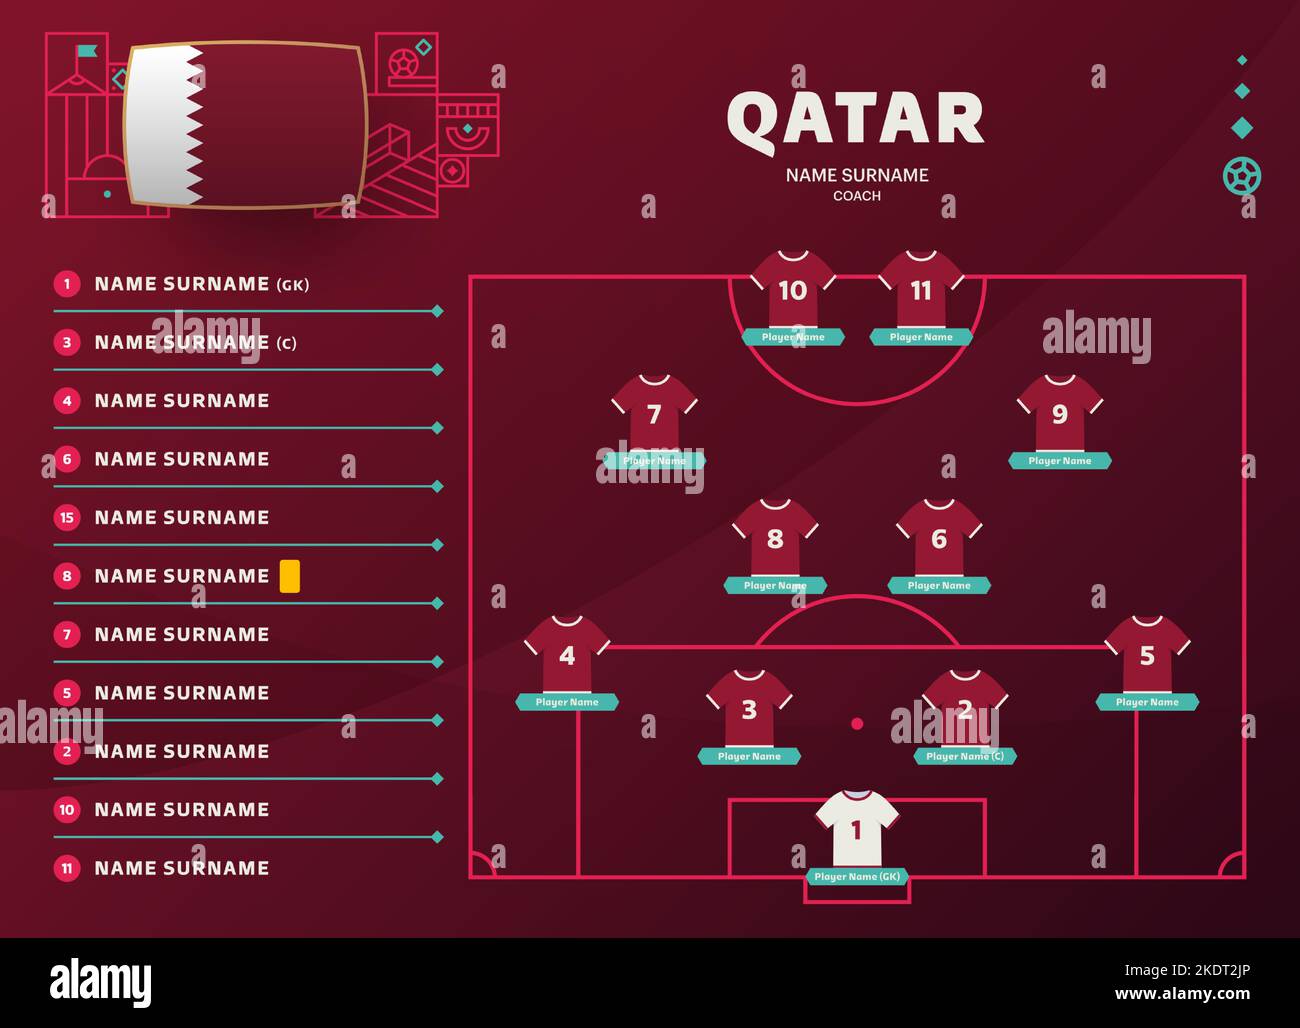 qatar line-up world Football 22 tournament final stage vector illustration. Country team lineup table and Team Formation on Football Field. soccer tou Stock Vector